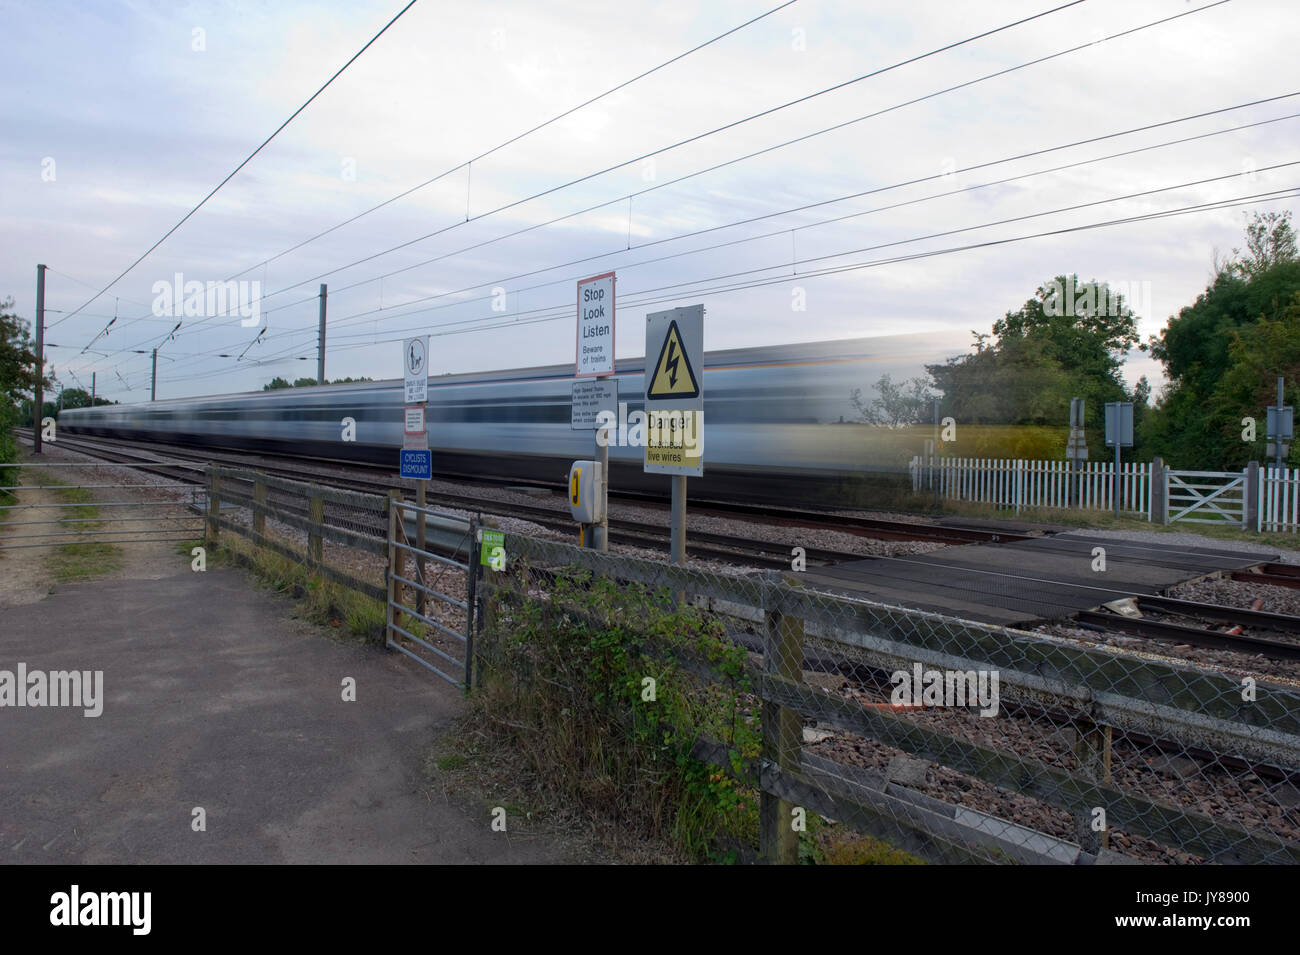 Trains at speed over pedestrian foot crossings on East Coast Main Line at Abbots Ripton, Cambridgeshire Stock Photo